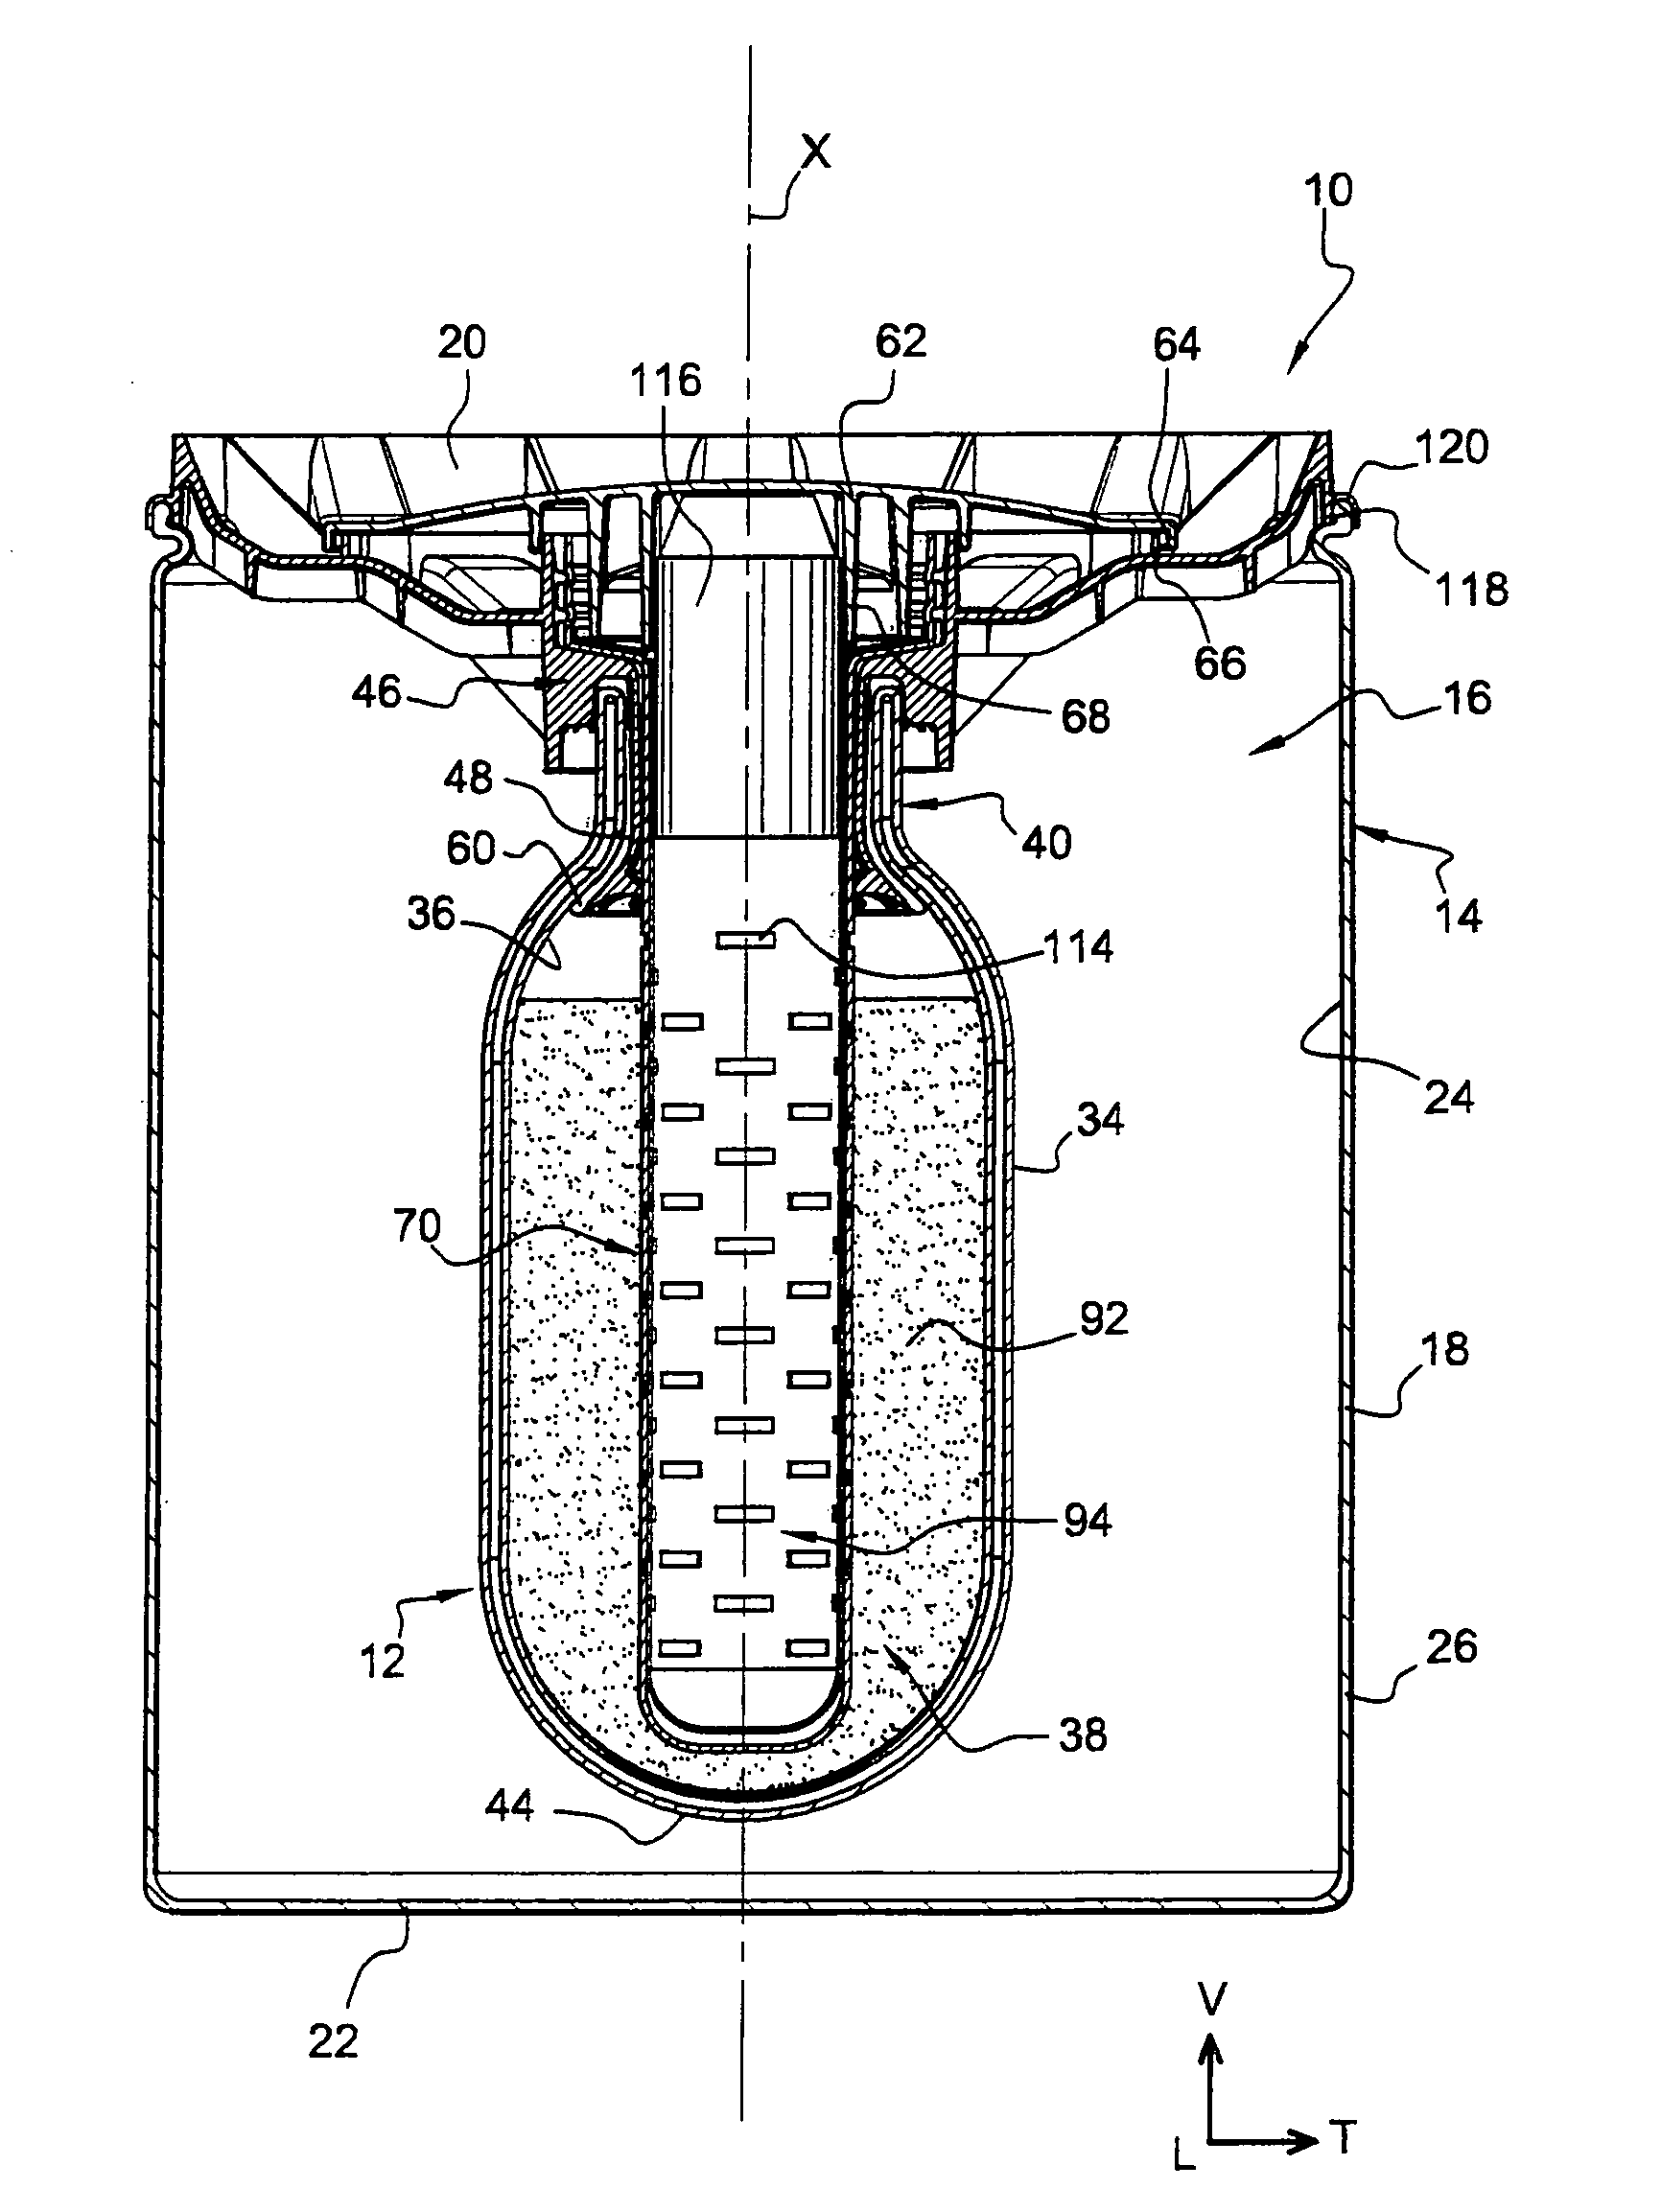 Transportation and/or storage device comprising a double-walled insulating bulb